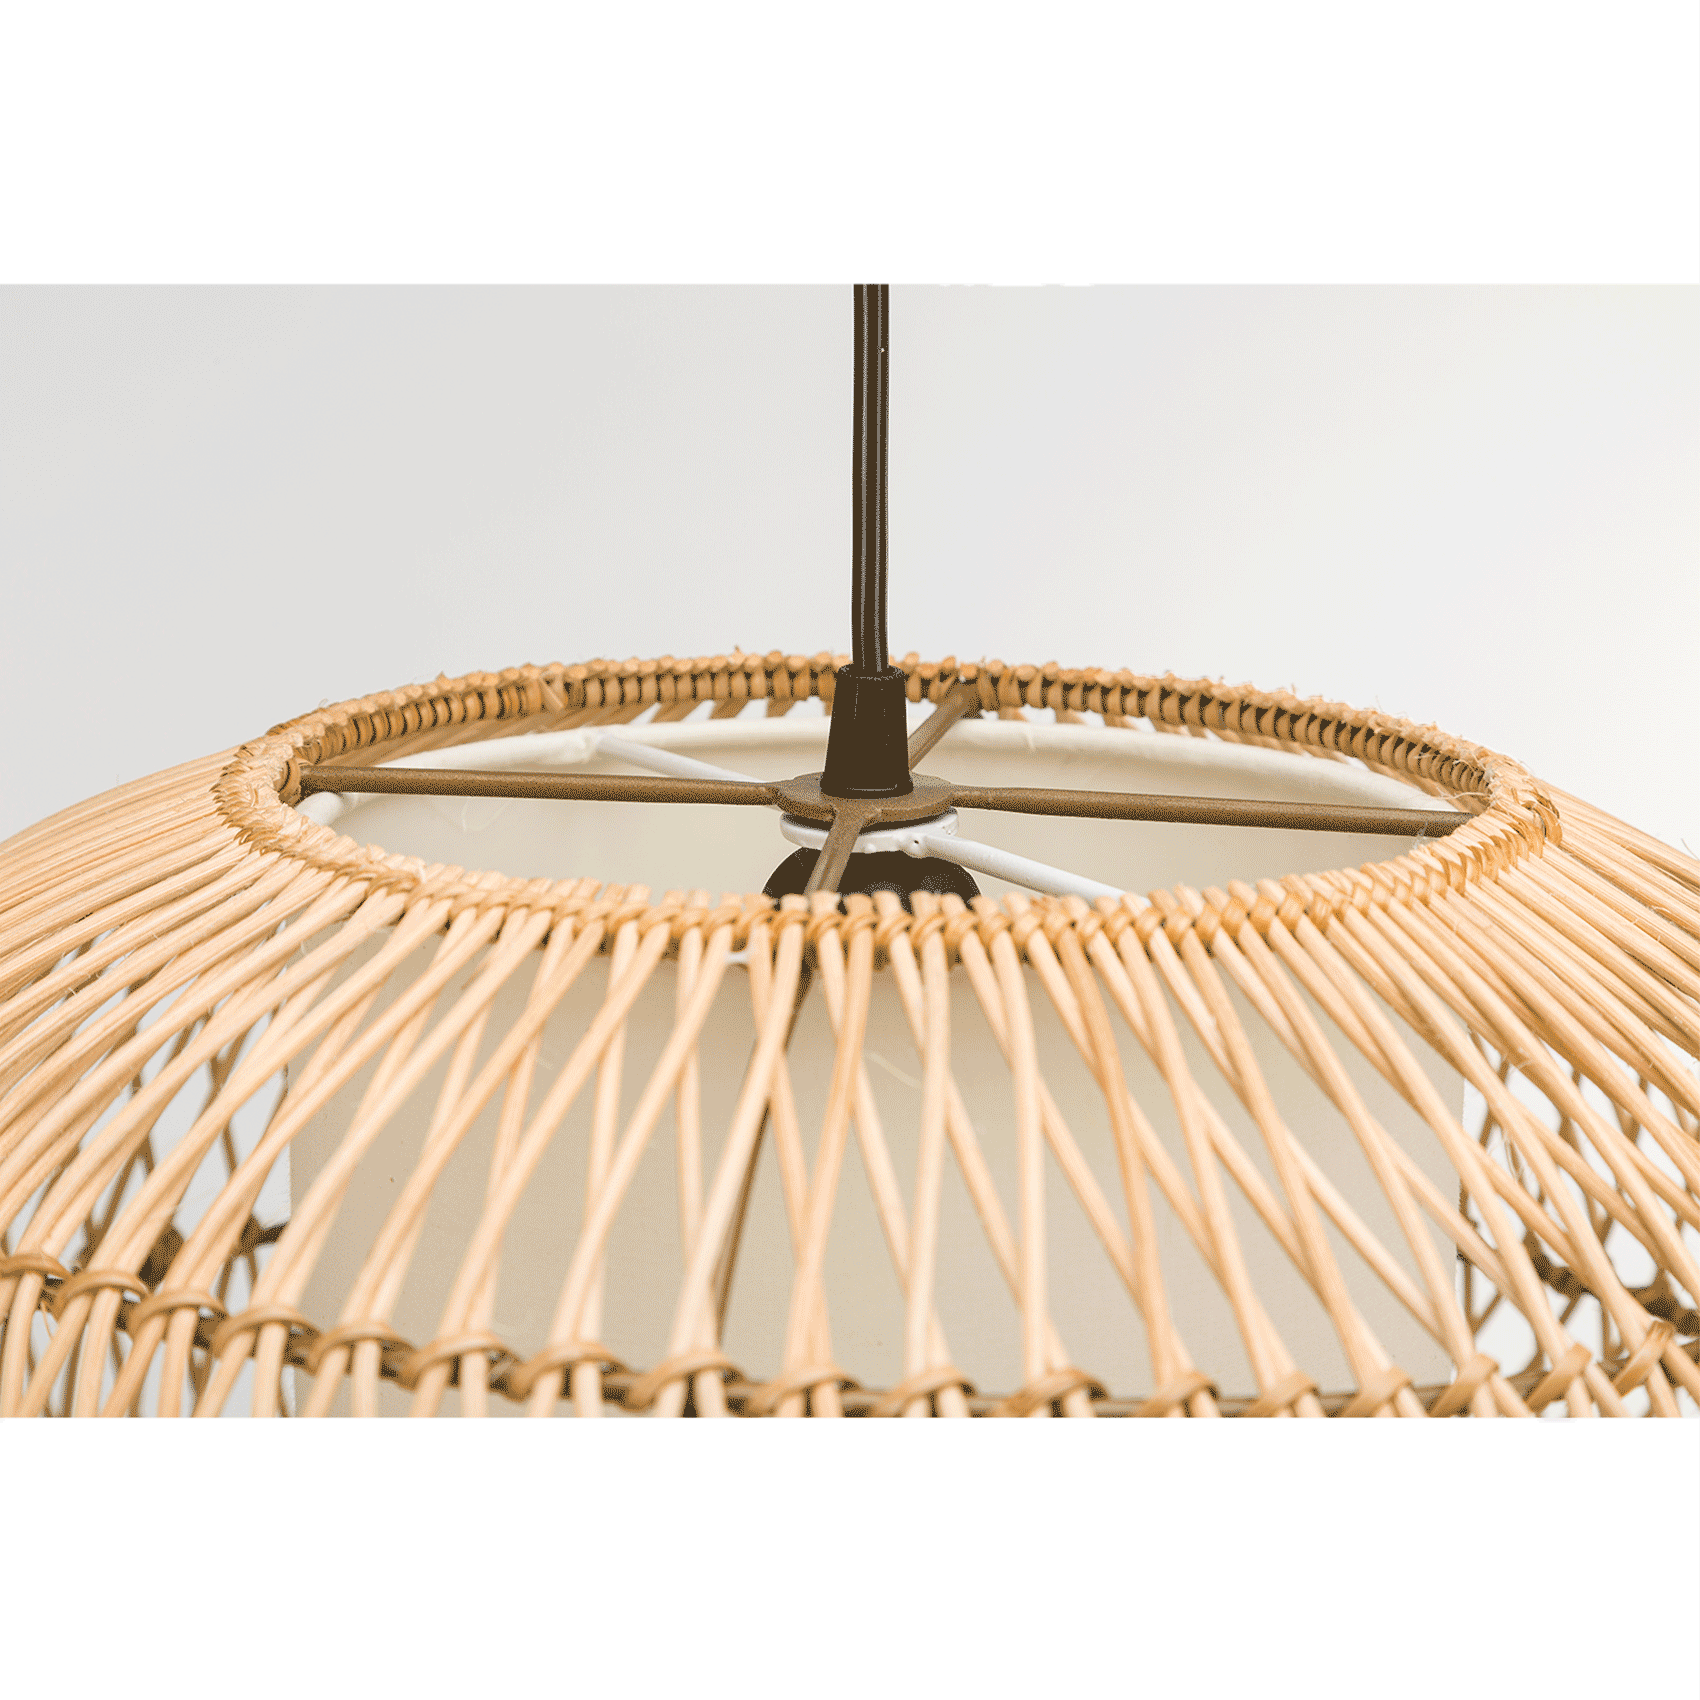  Buy Pendant Lights Online at Affordable Price